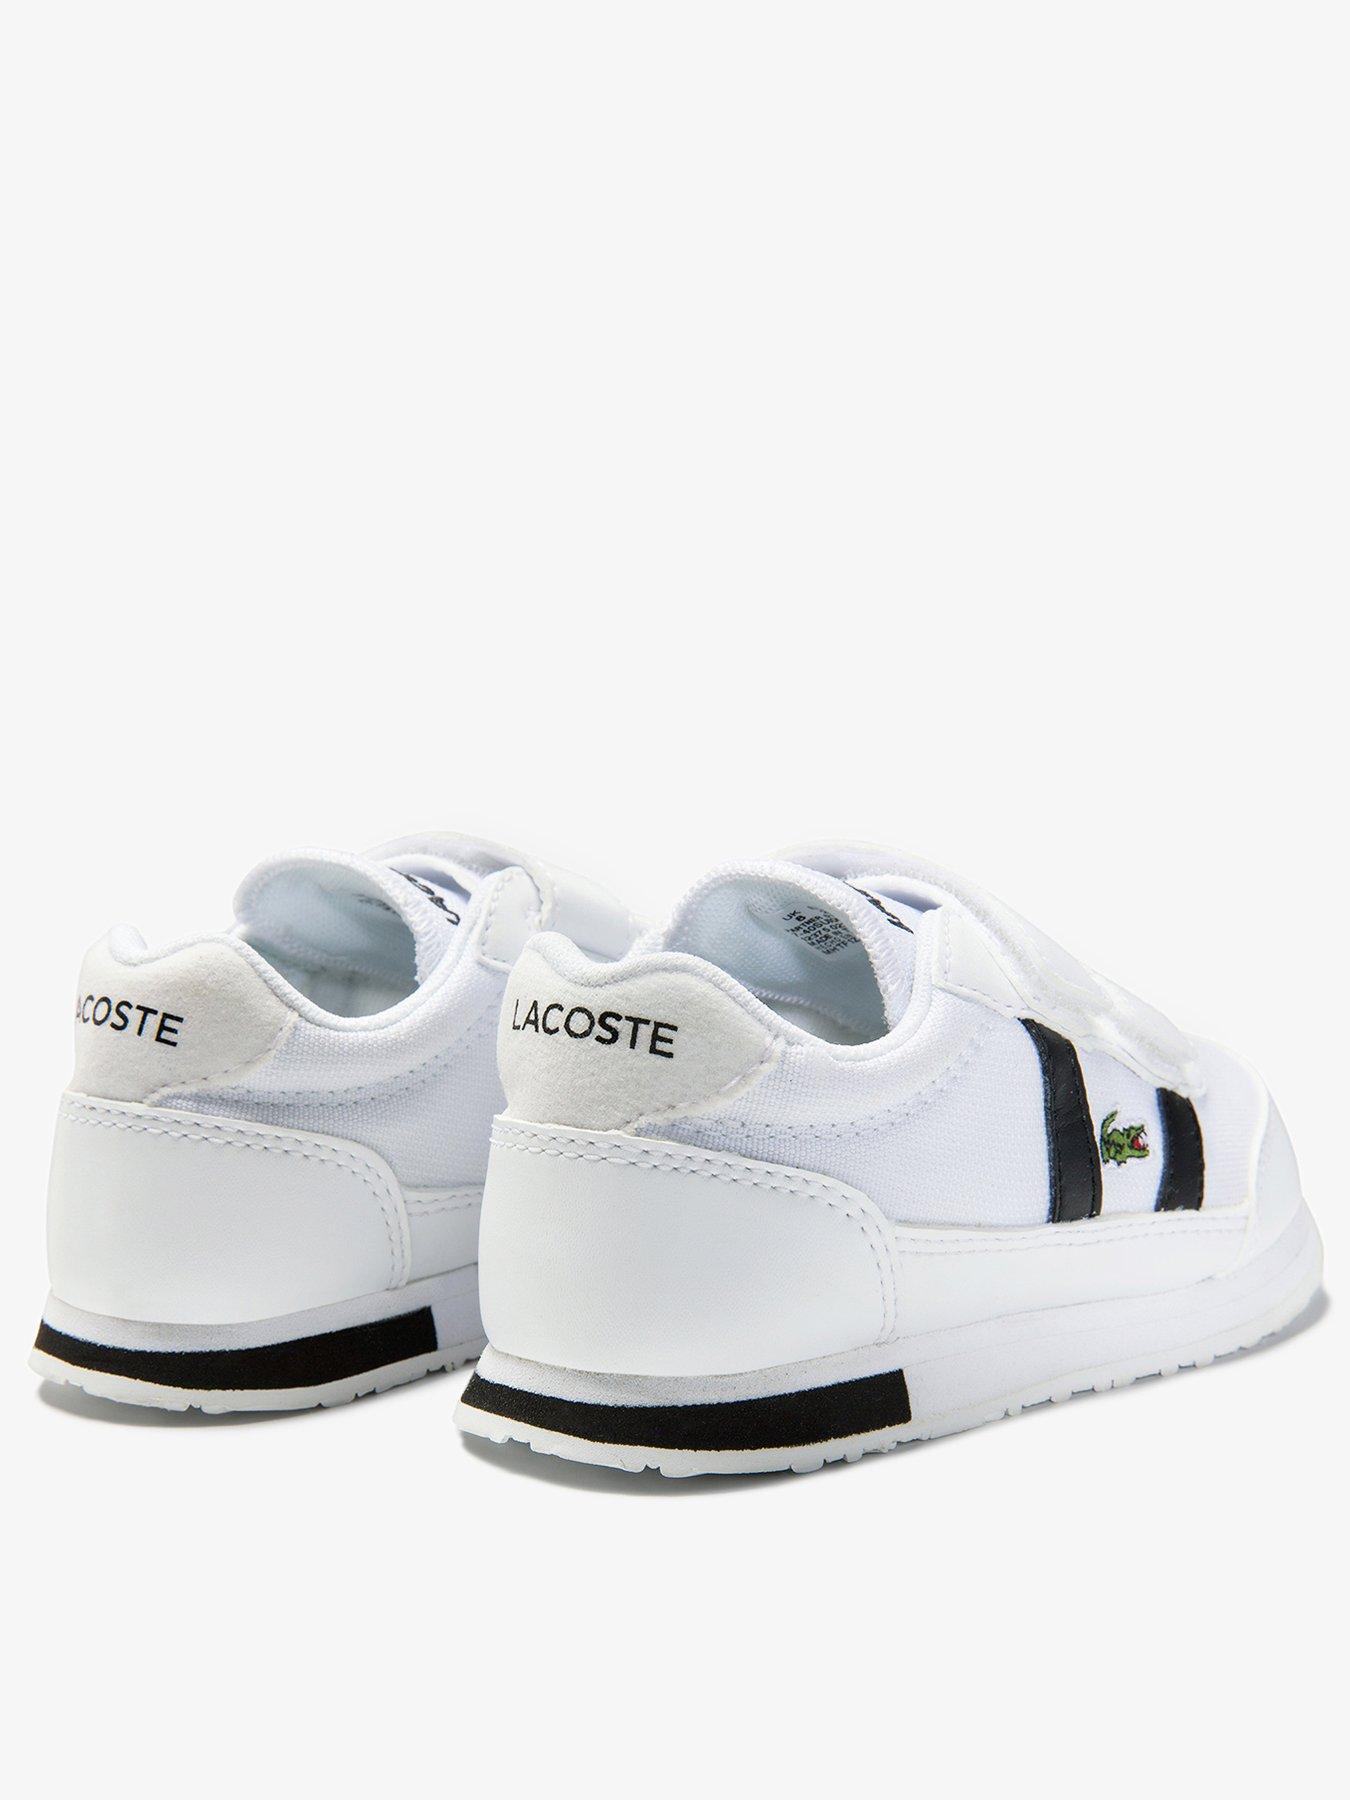 lacoste childrens shoes